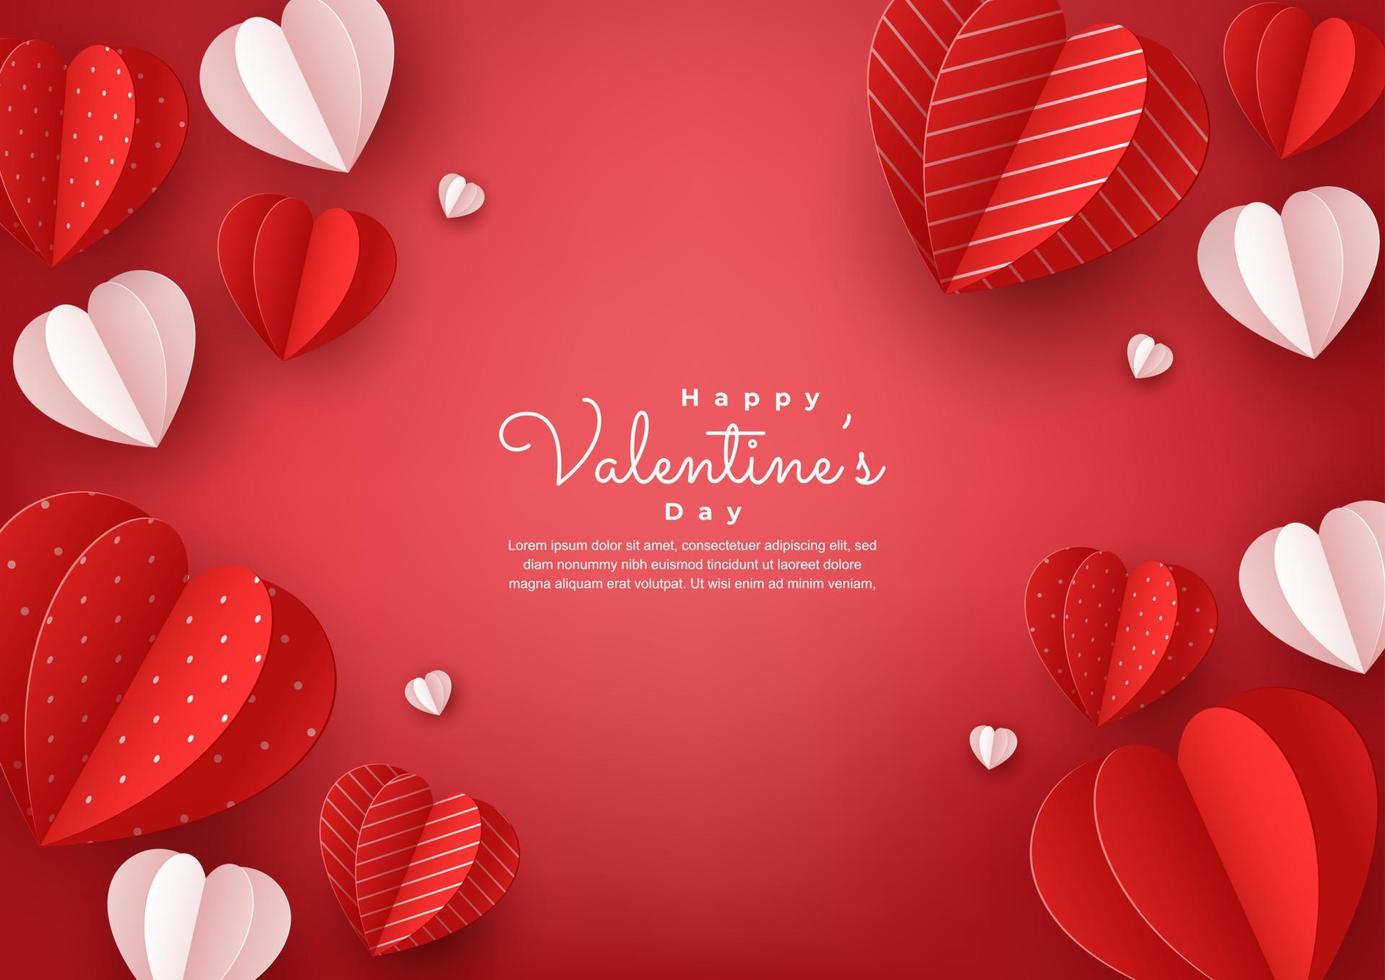 paper hearts style valentines day card vector